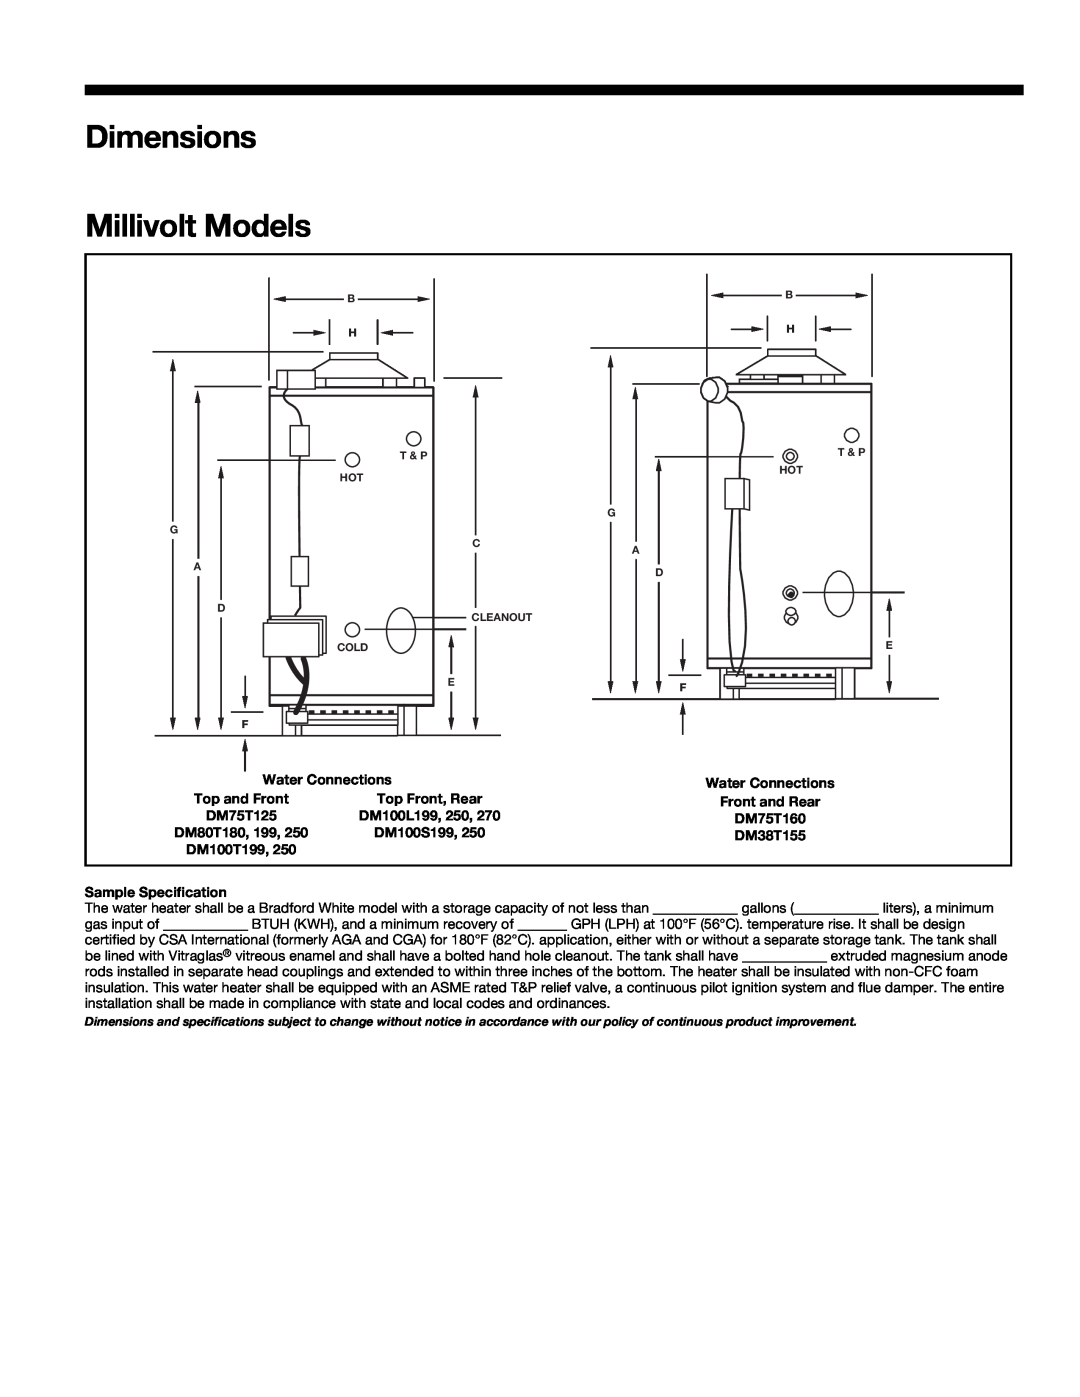 Bradford-White Corp Dimensions Millivolt Models, Water Connections, Top and Front, Top Front, Rear, DM75T125, DM75T160 